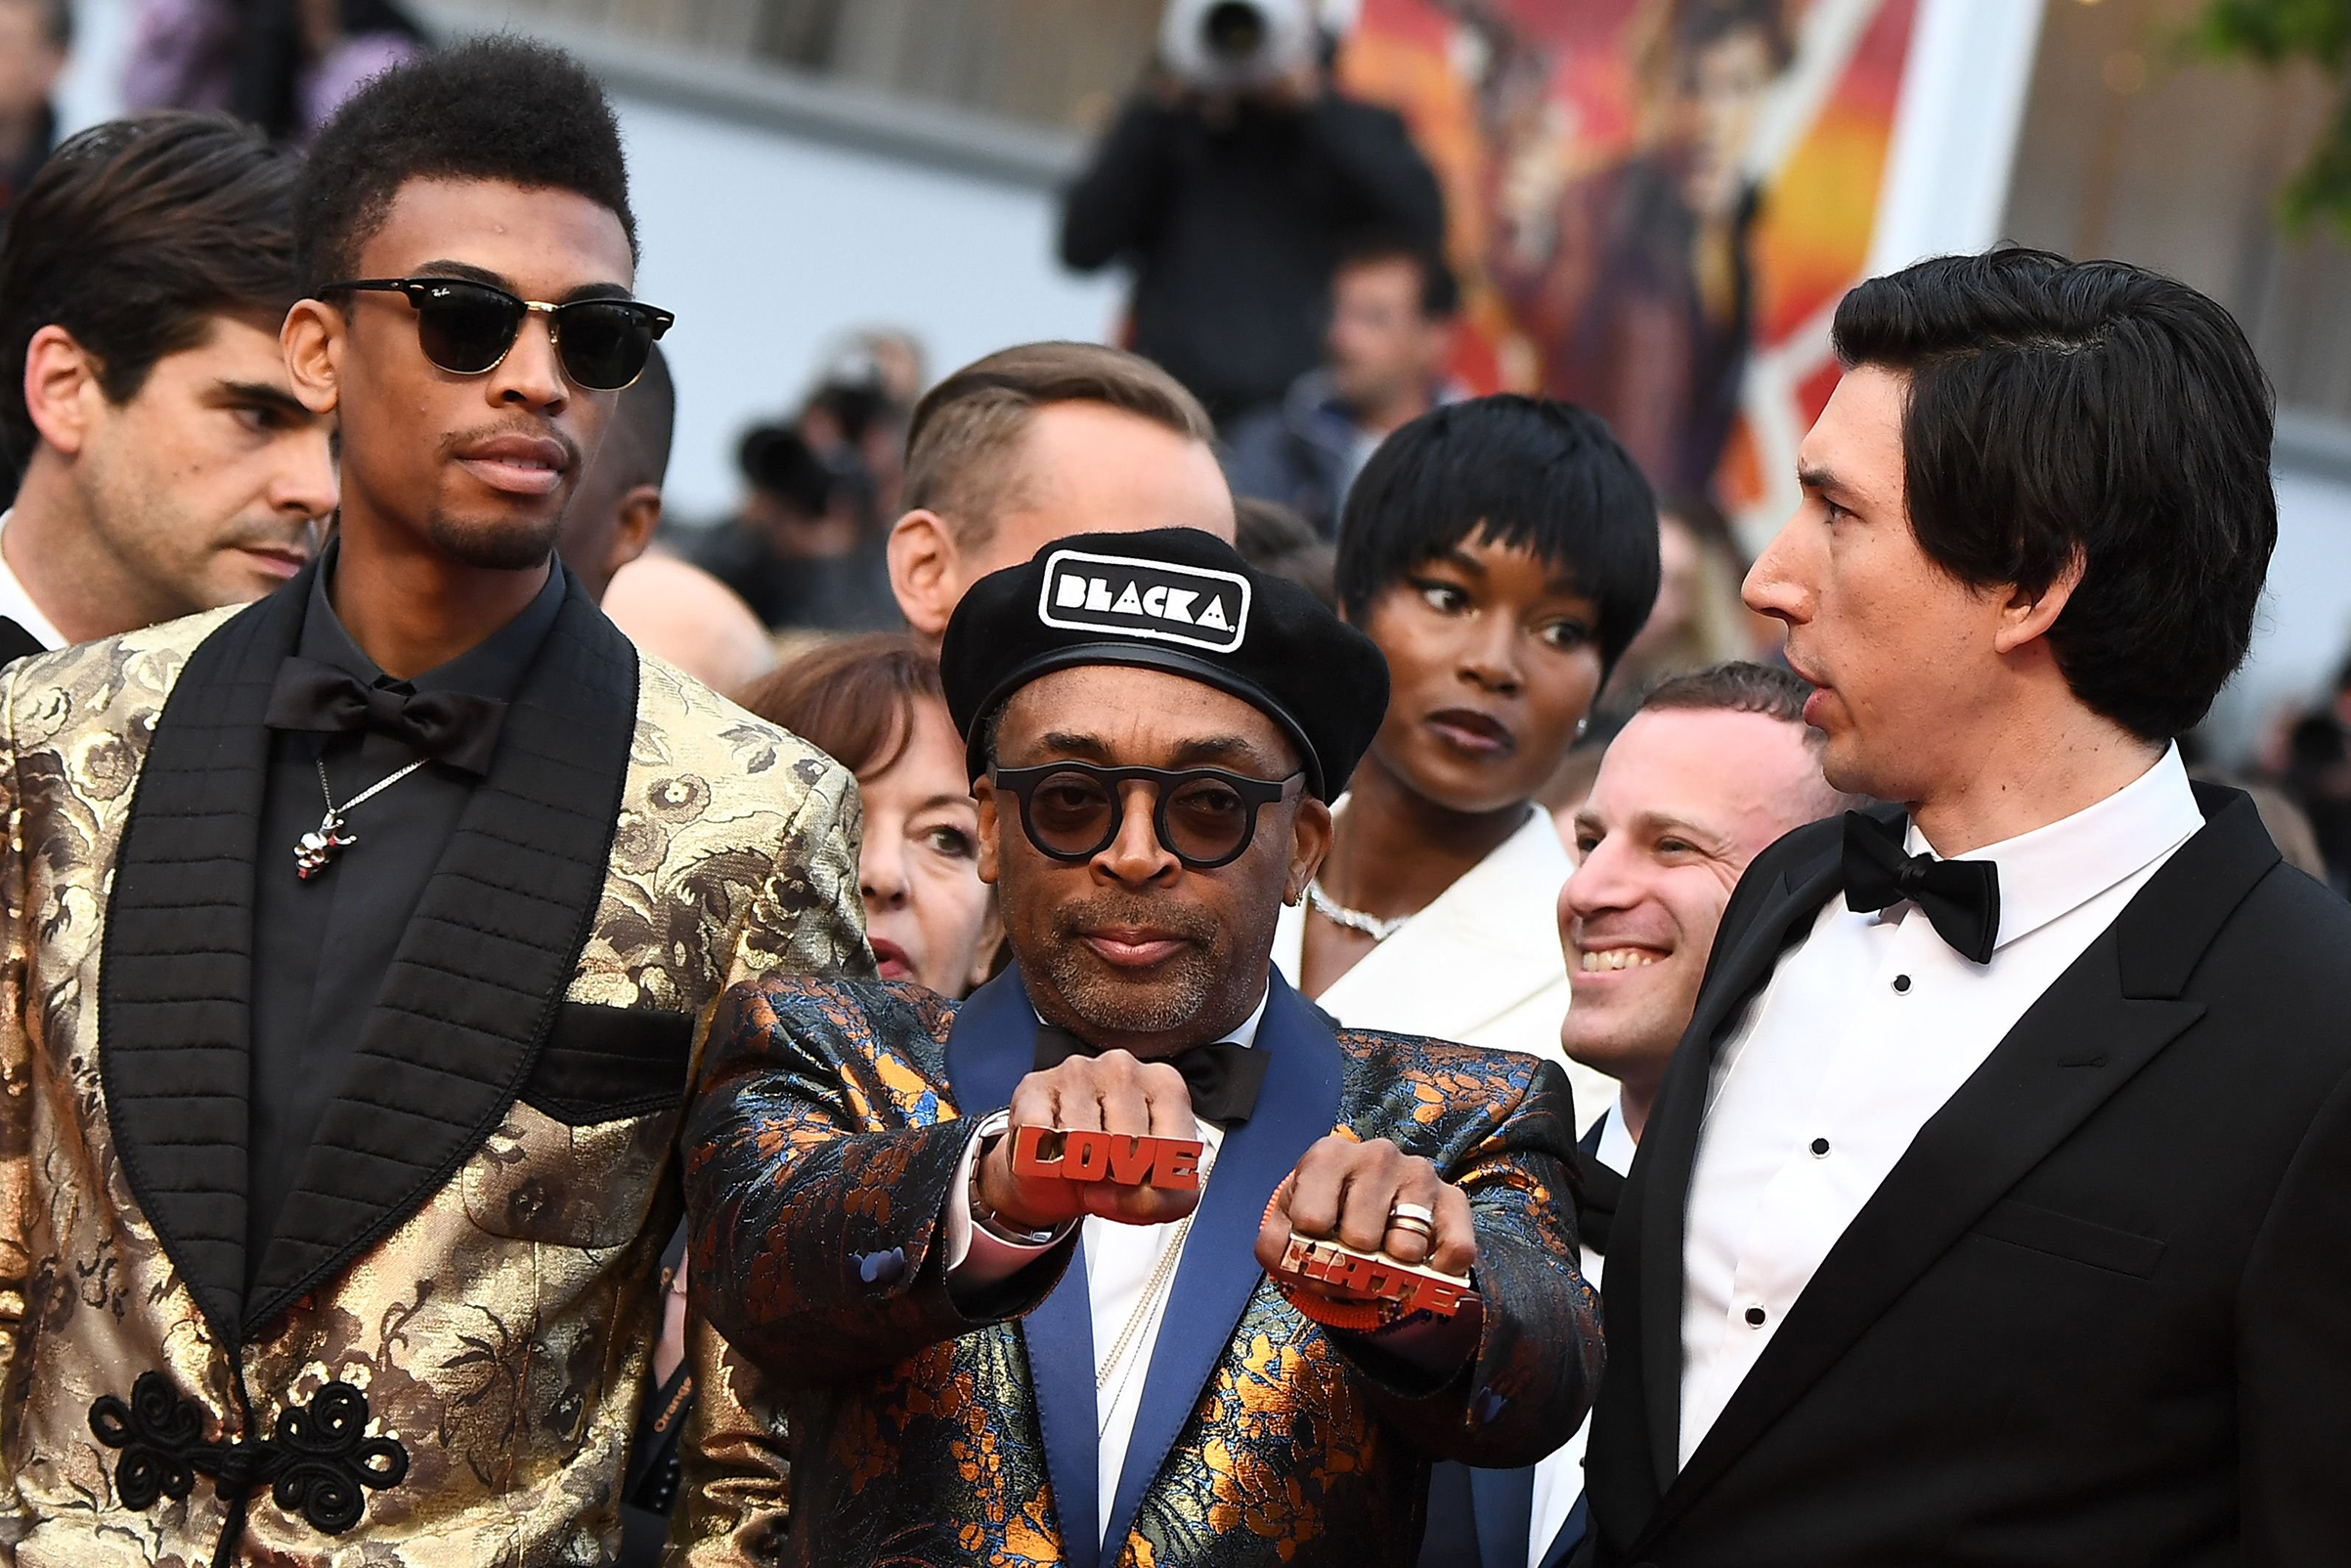 Director Spike Lee and actor Adam Driver, right, arrive for the screening of "BlacKkKlansman" at the Cannes Film Festival in southern France on May 14, 2018. (Anne-Christine Poujoulat—AFP/Getty Images)